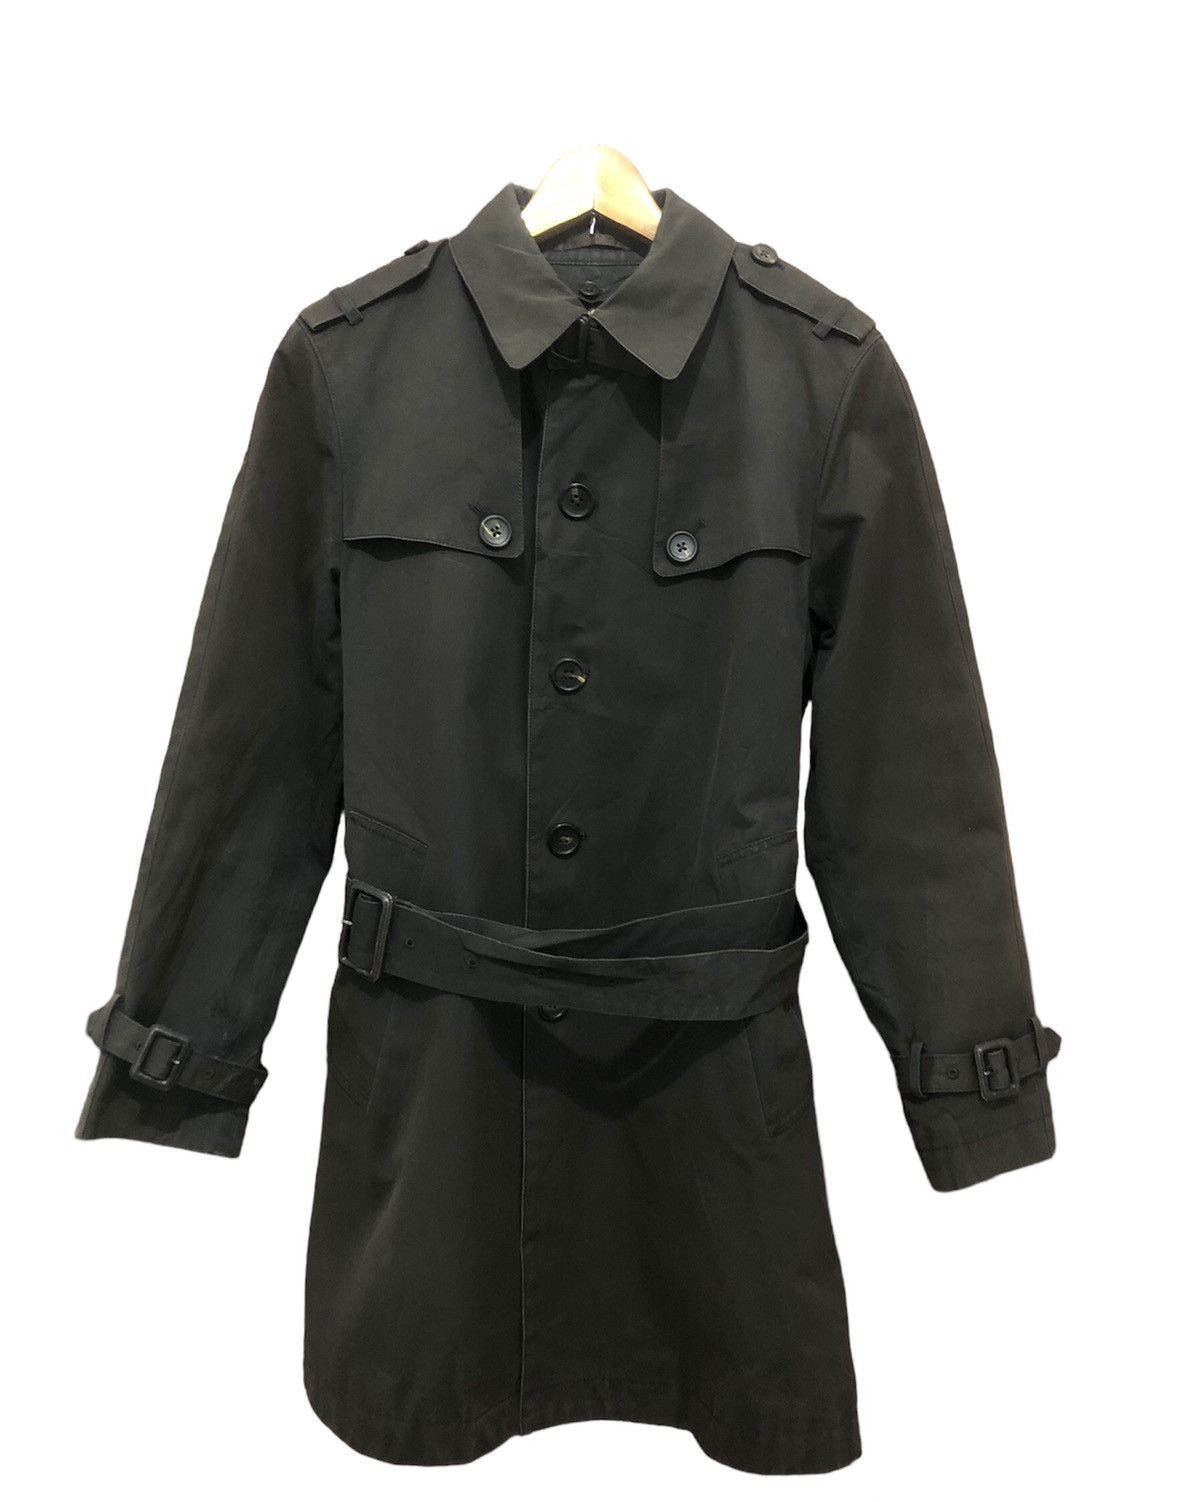 Paul Smith Trench Coat Dark Brown Colour - 1